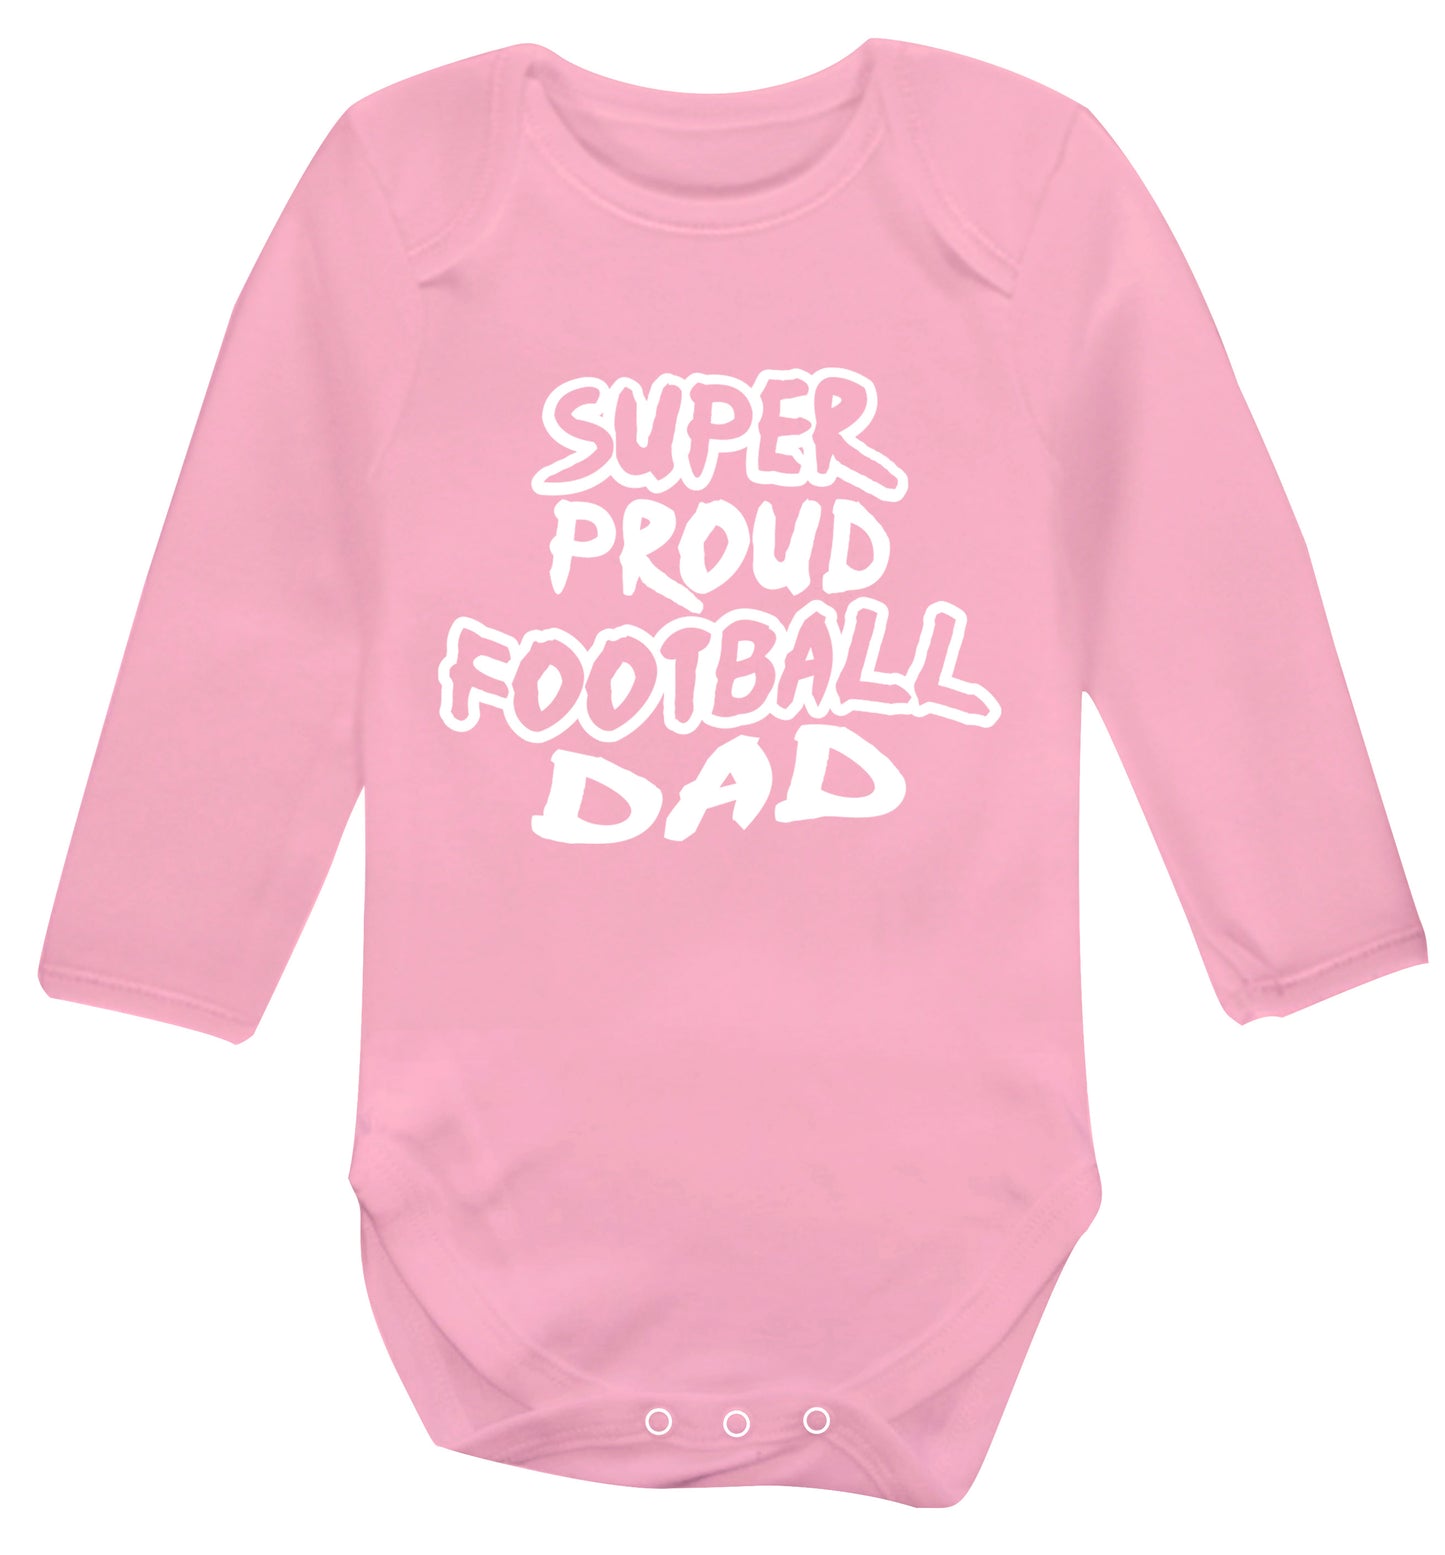 Super proud football dad Baby Vest long sleeved pale pink 6-12 months